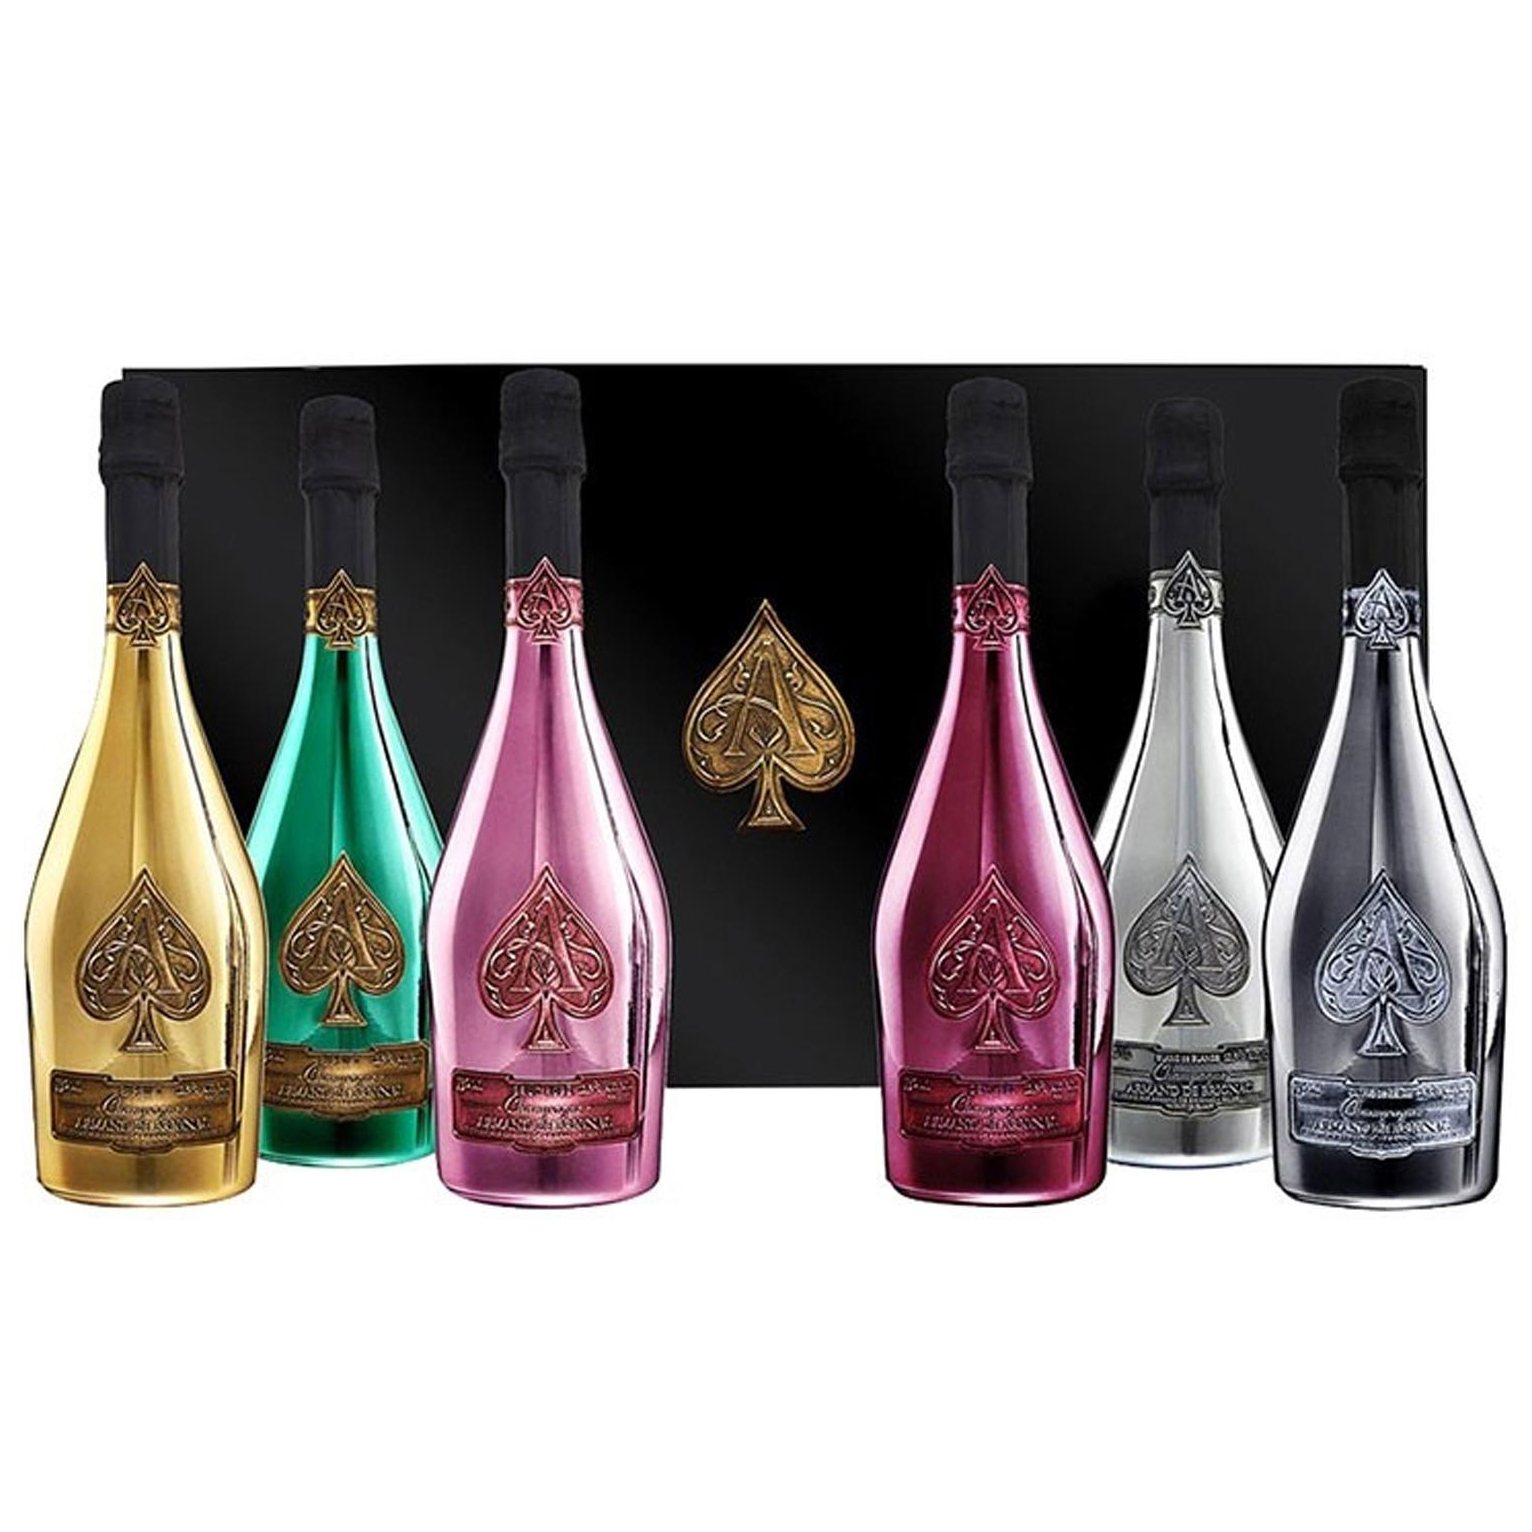 Personalised Armand de Brignac Ace of Spades Brut Gold NV Engraved Champagne